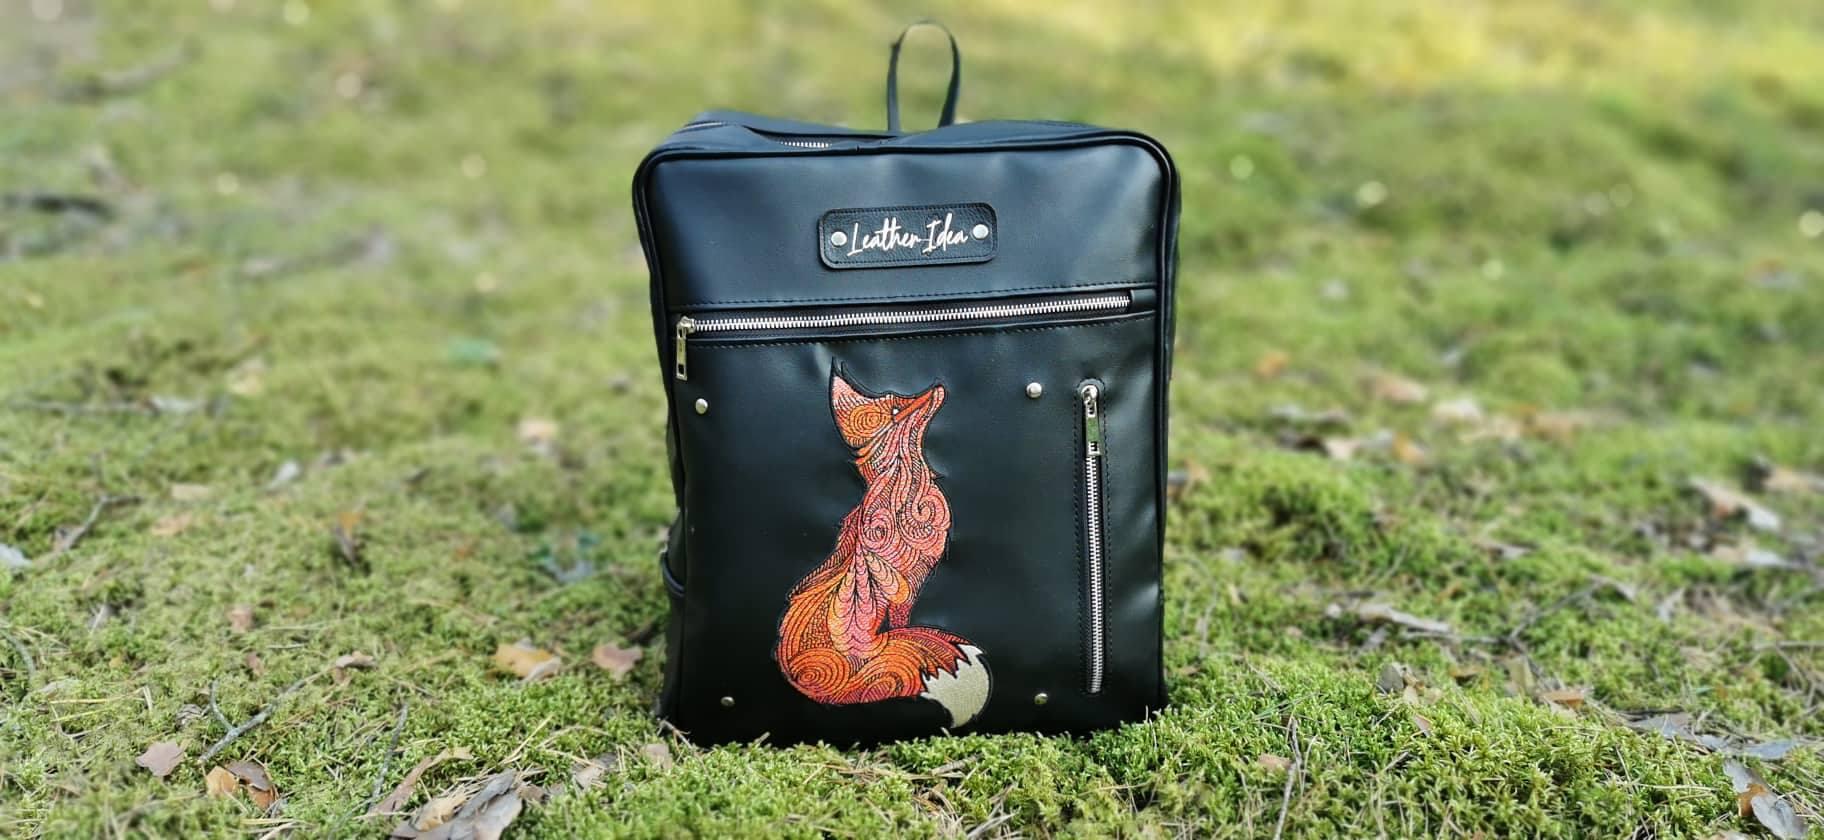 Enliven Your Creations with the Mosaic Fox Embroidery Design